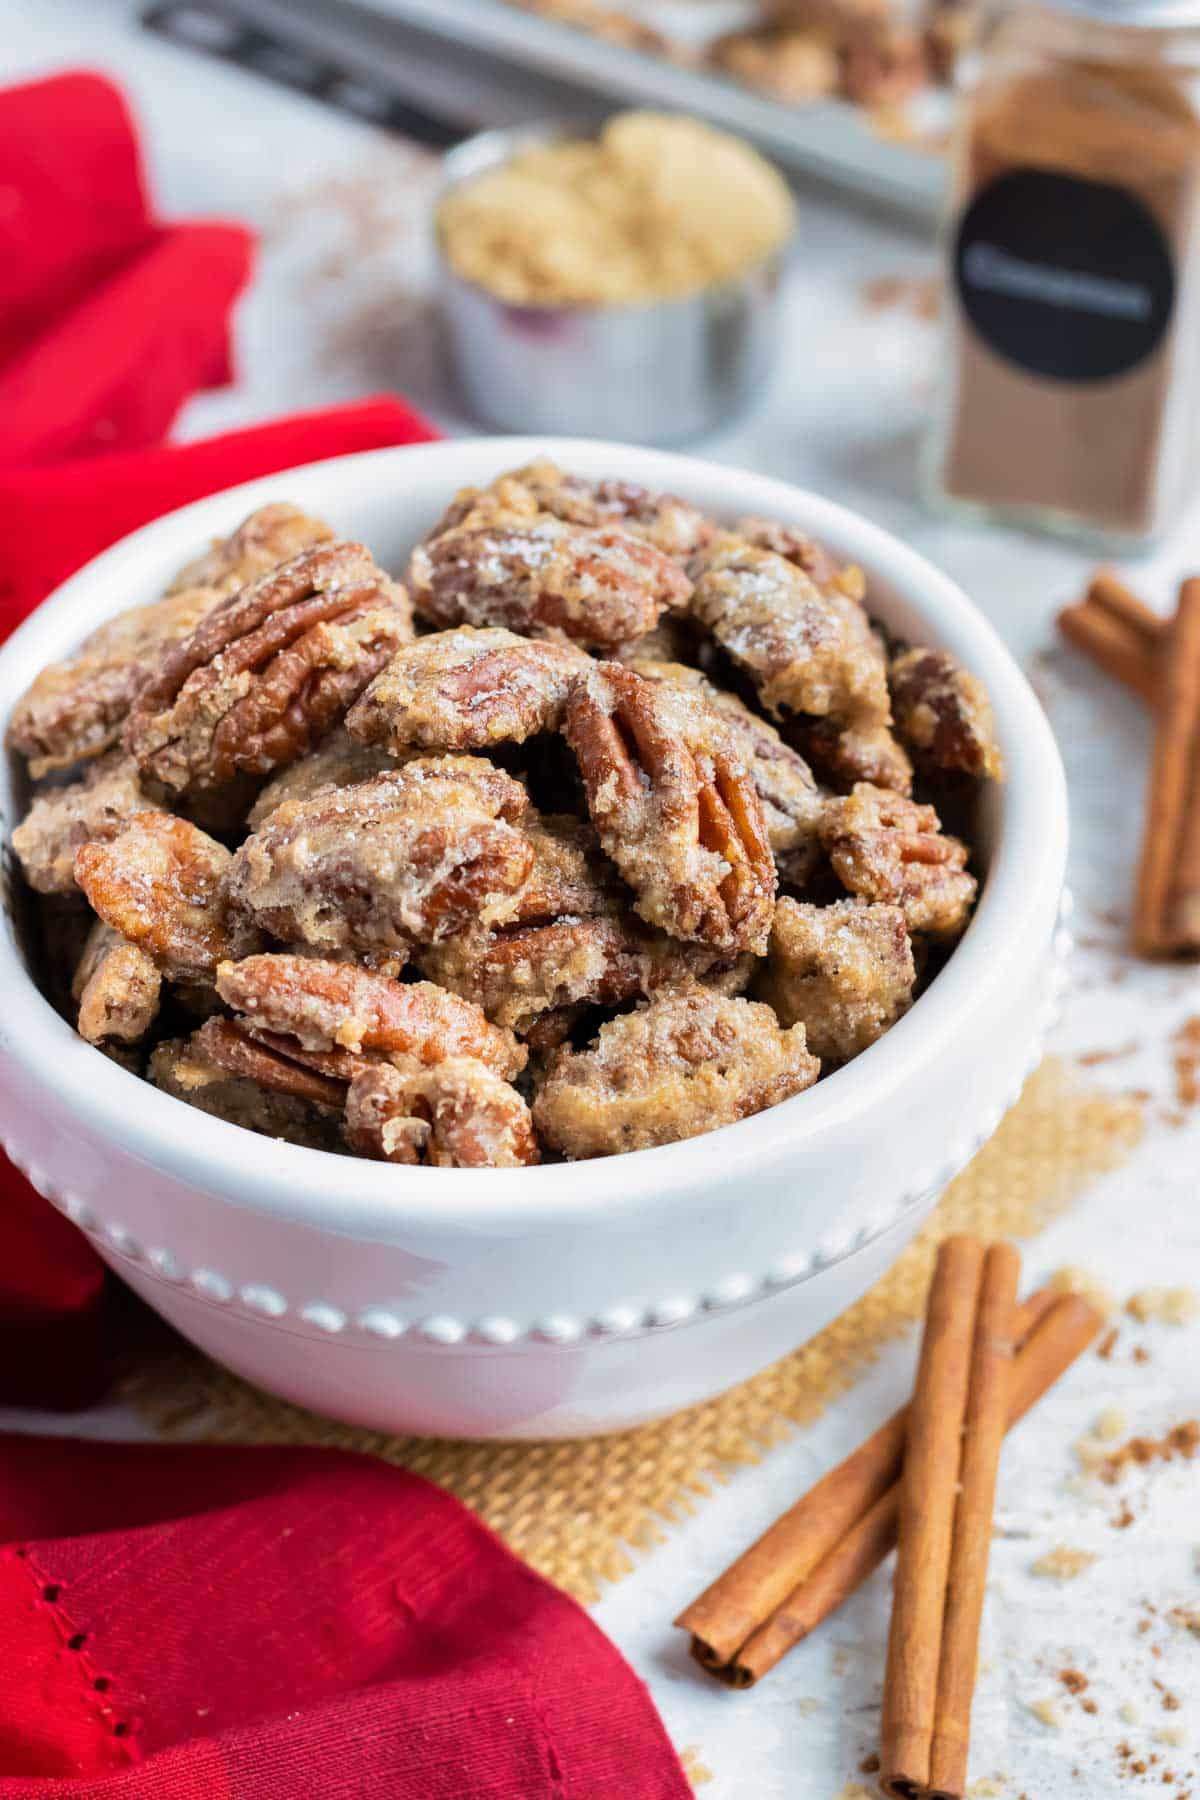 Spiced pecans with cinnamon sugar in a white snack bowl for a party.